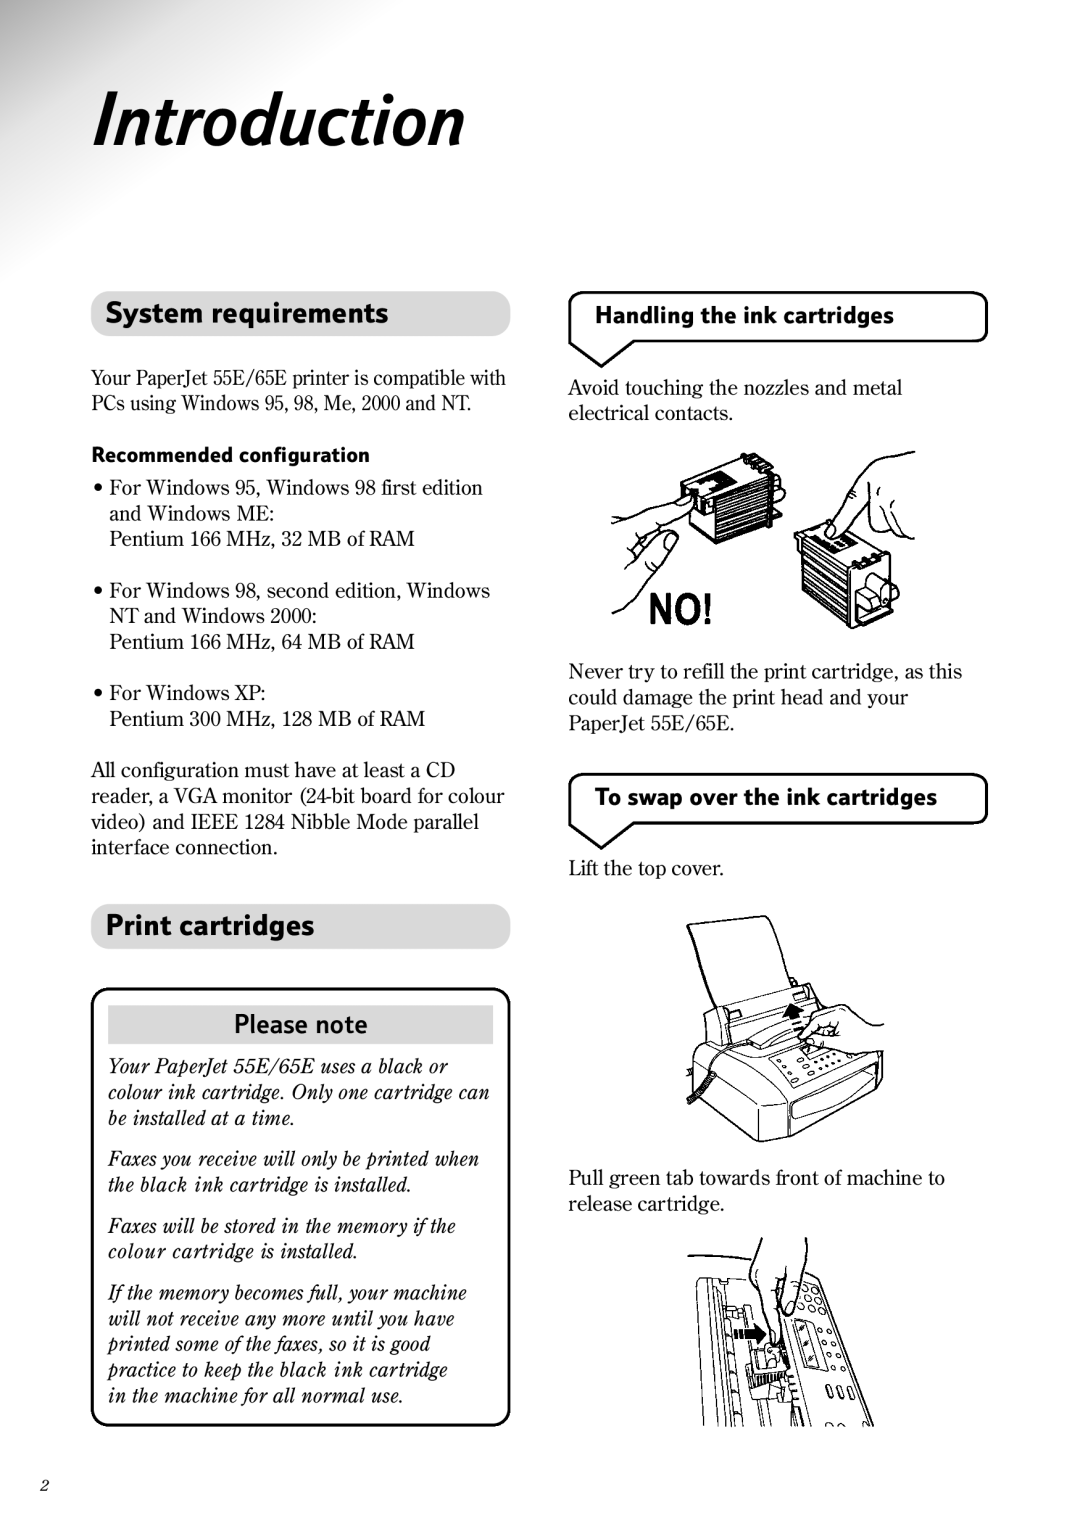 BT 65e manual Introduction, System requirements, Print cartridges, Please note, Handling the ink cartridges 